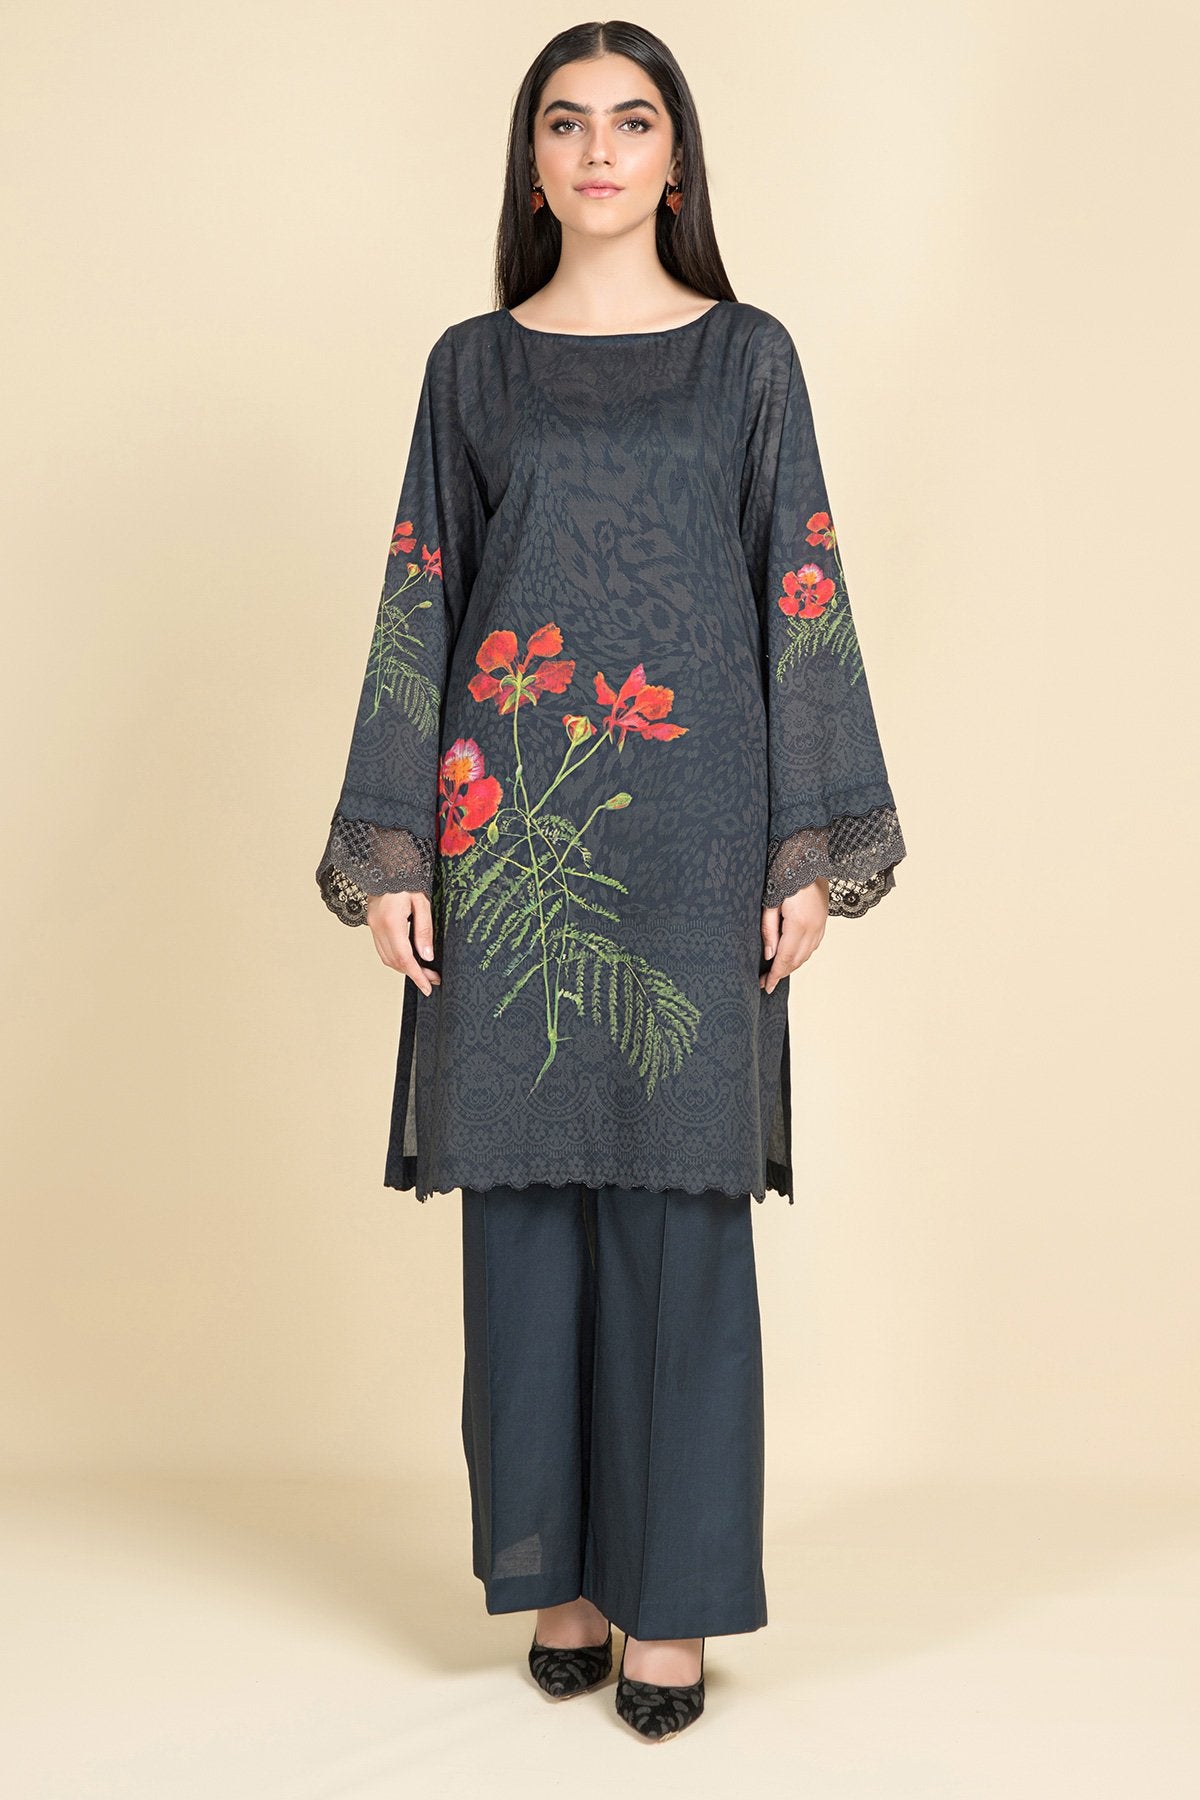 Digital Printed Shirt With Dyed & Embroidered Poly net Lace